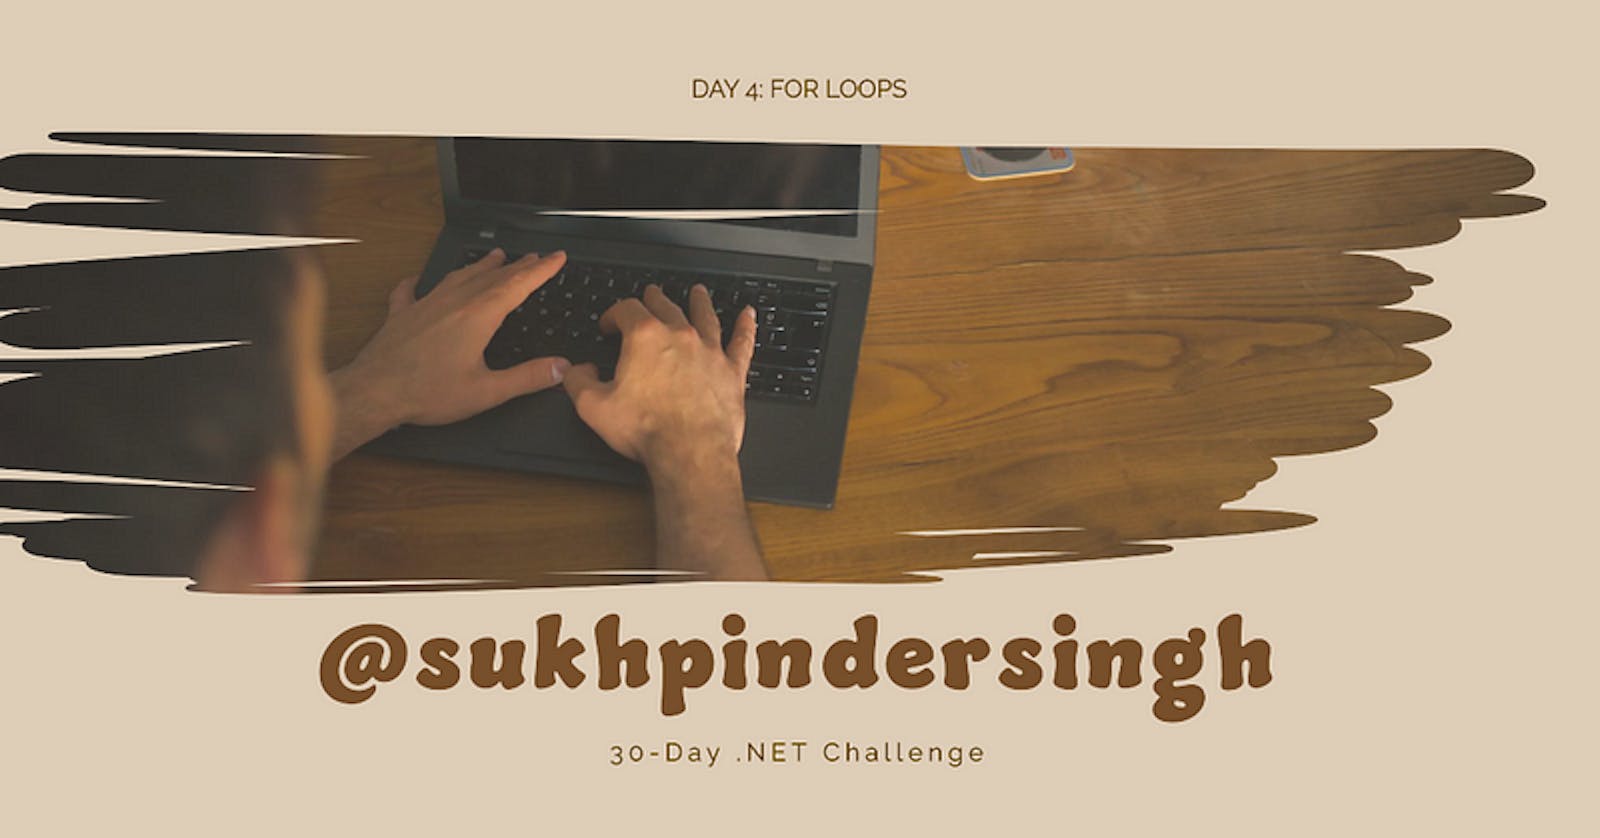 Day 4 of 30-Day .NET Challenge: For Loops